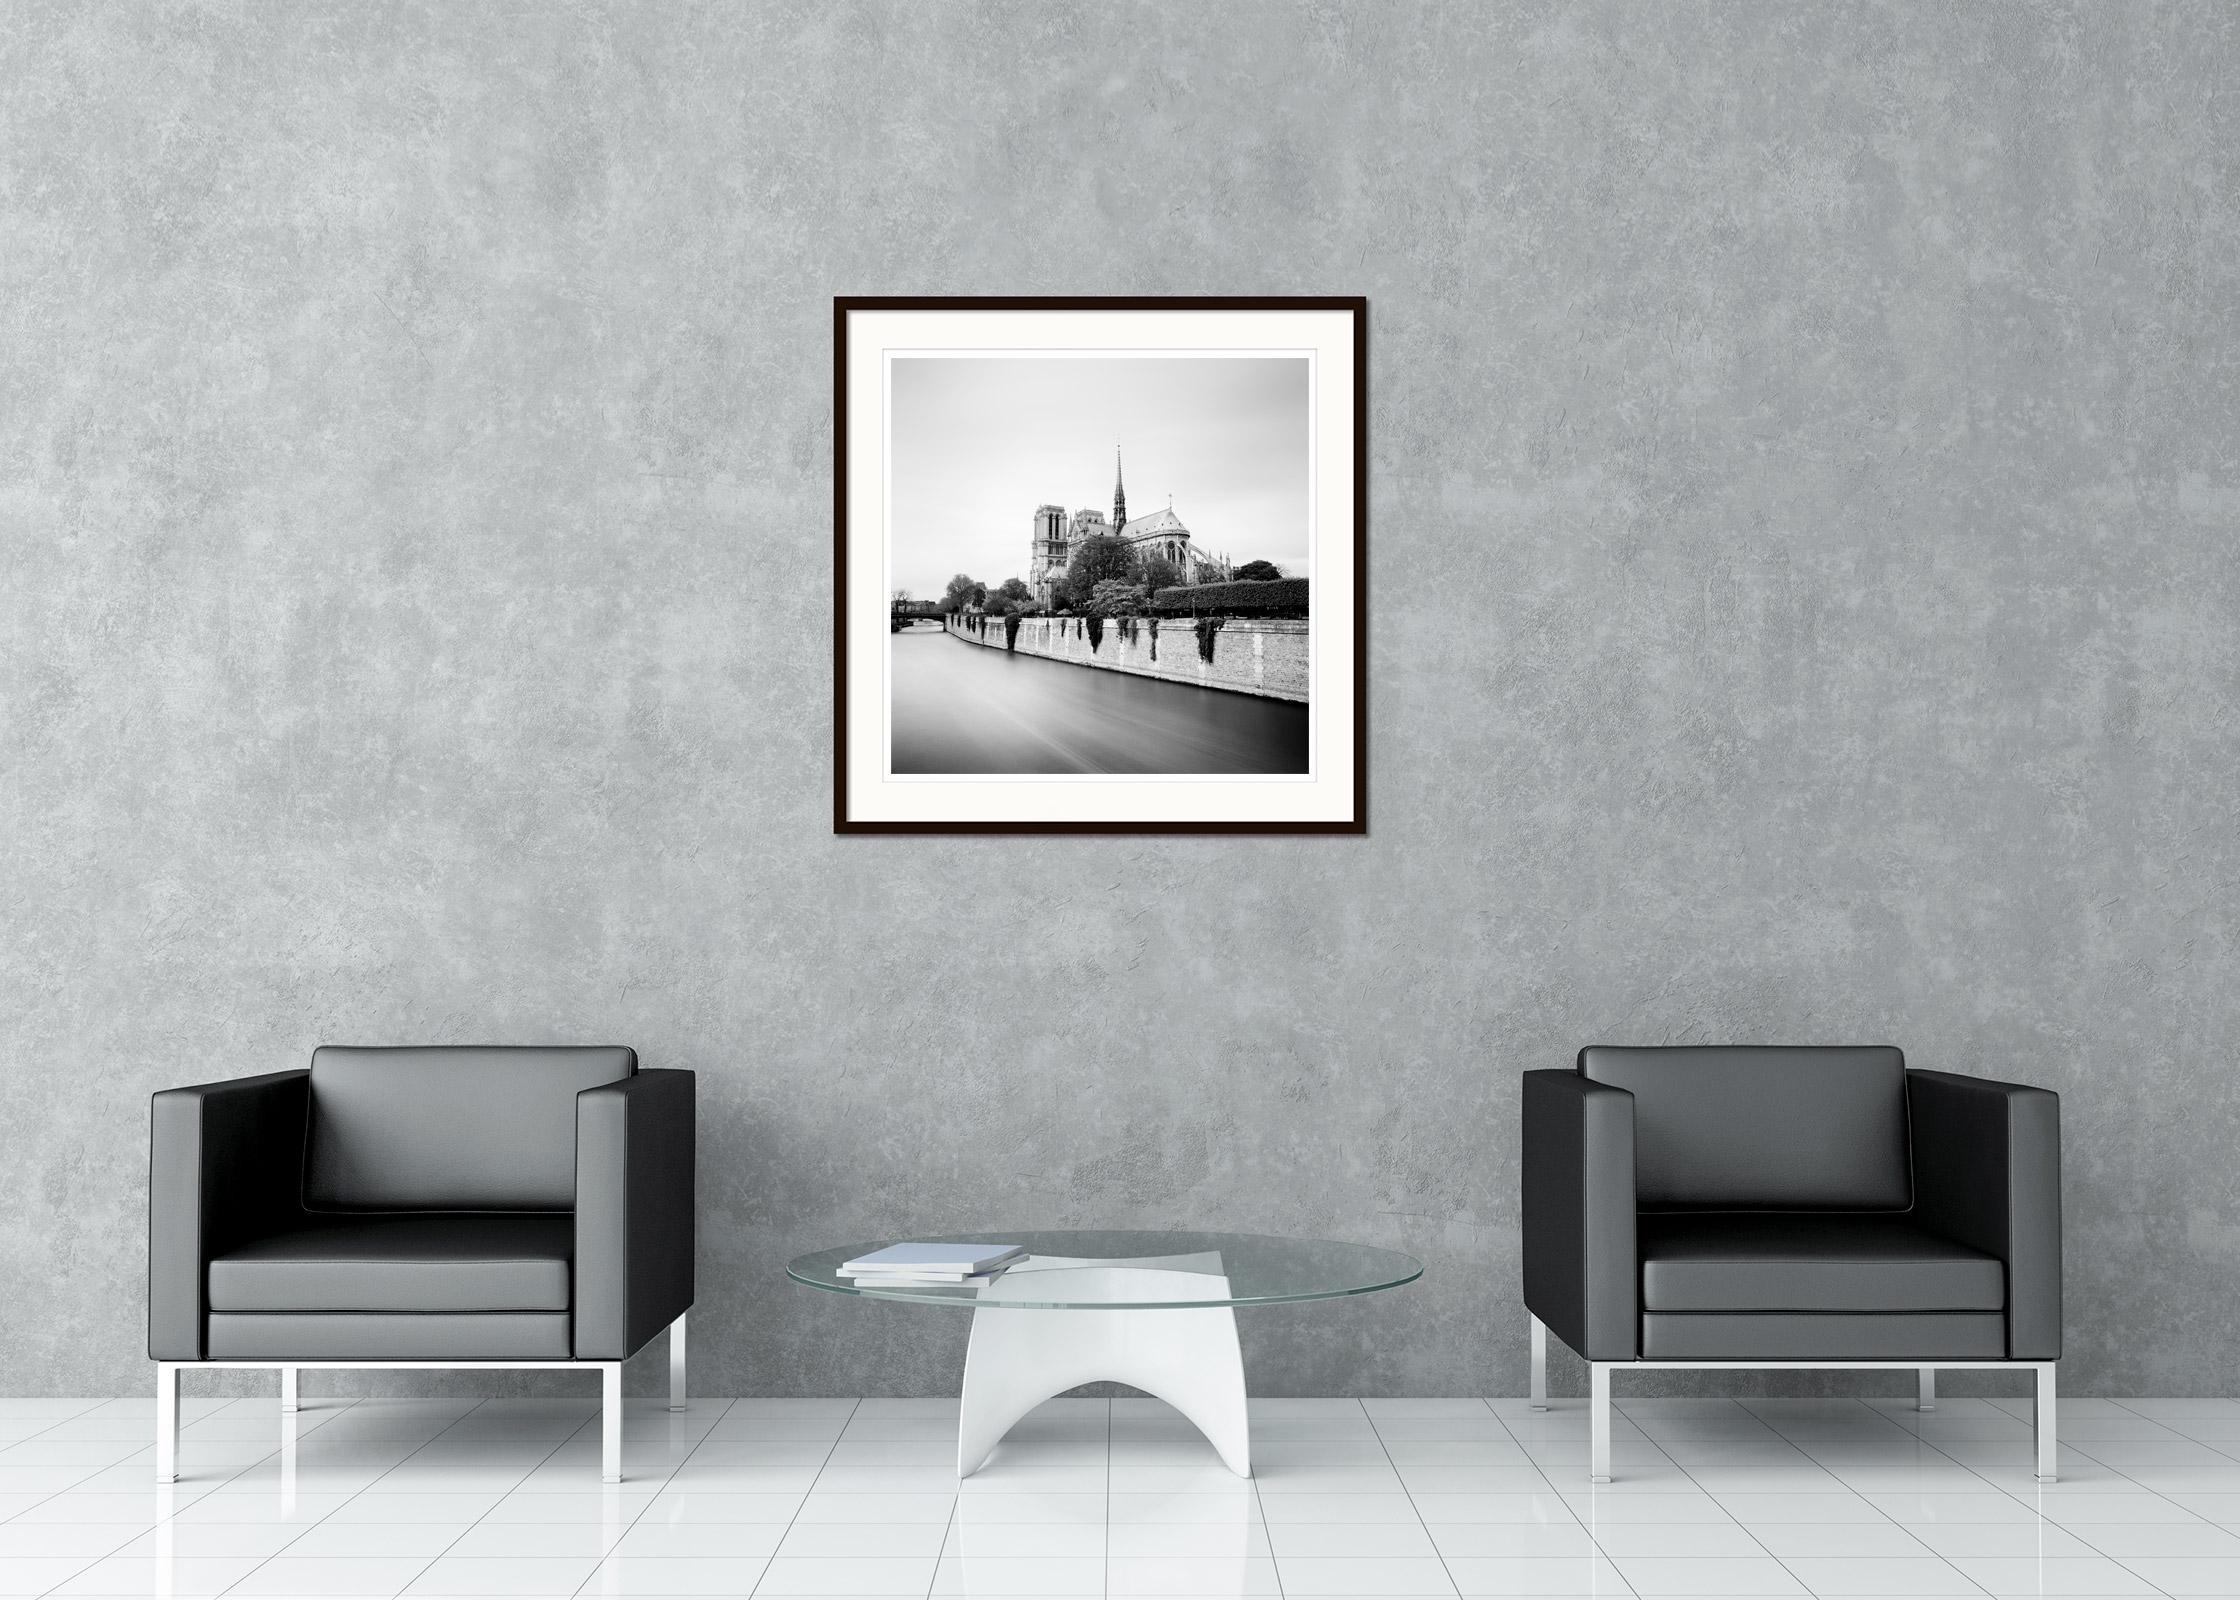 Black and White Fine Art minimalist photography - Notre-Dame Cathedral the soul and the heart of Paris. Archival pigment ink print, edition of 9. Signed, titled, dated and numbered by artist. Certificate of authenticity included. Printed with 4cm